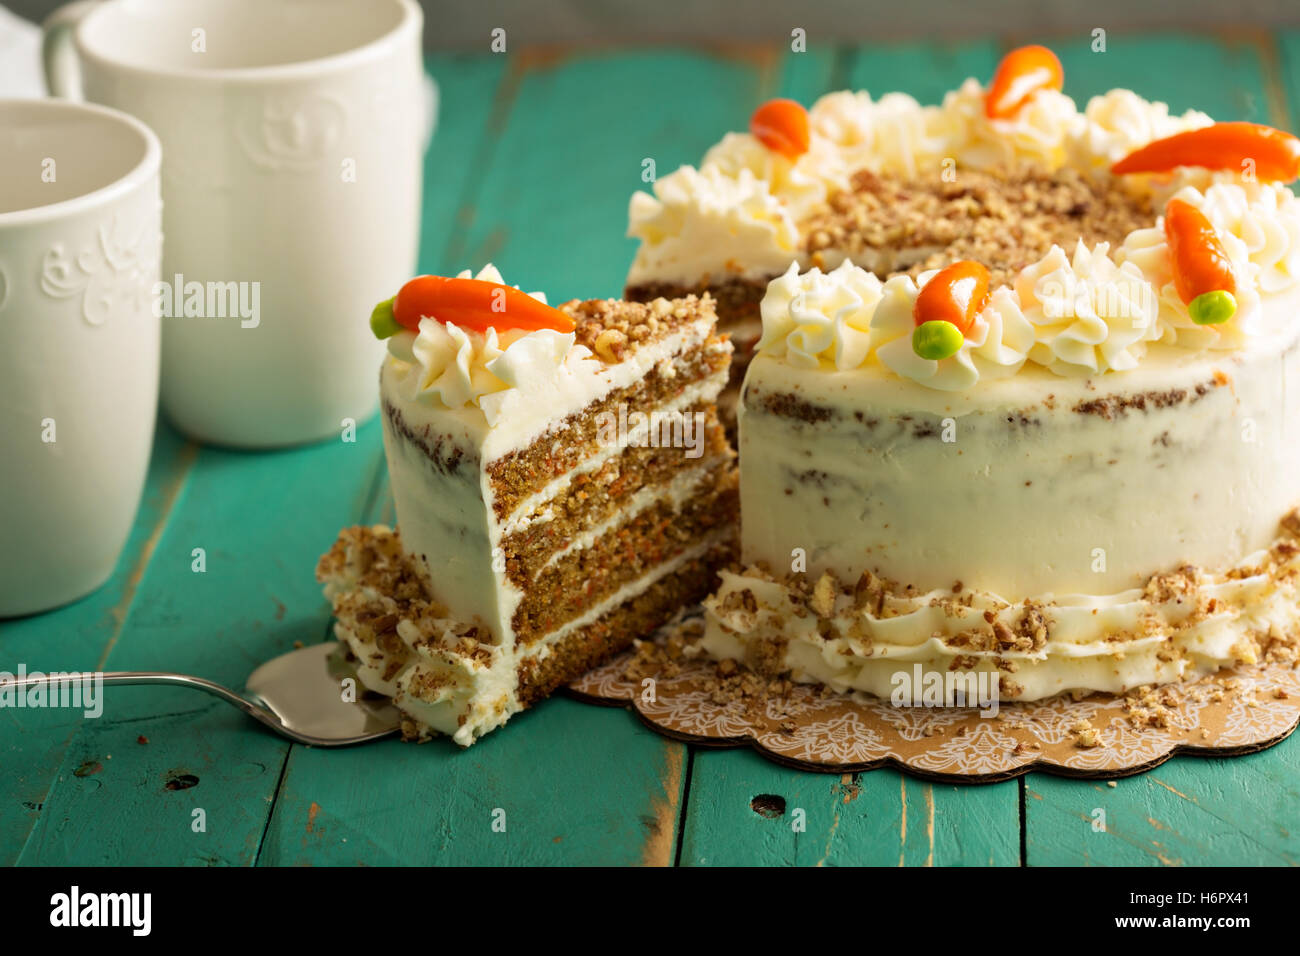 Slice of carrot cake with cream cheese frosting Stock Photo